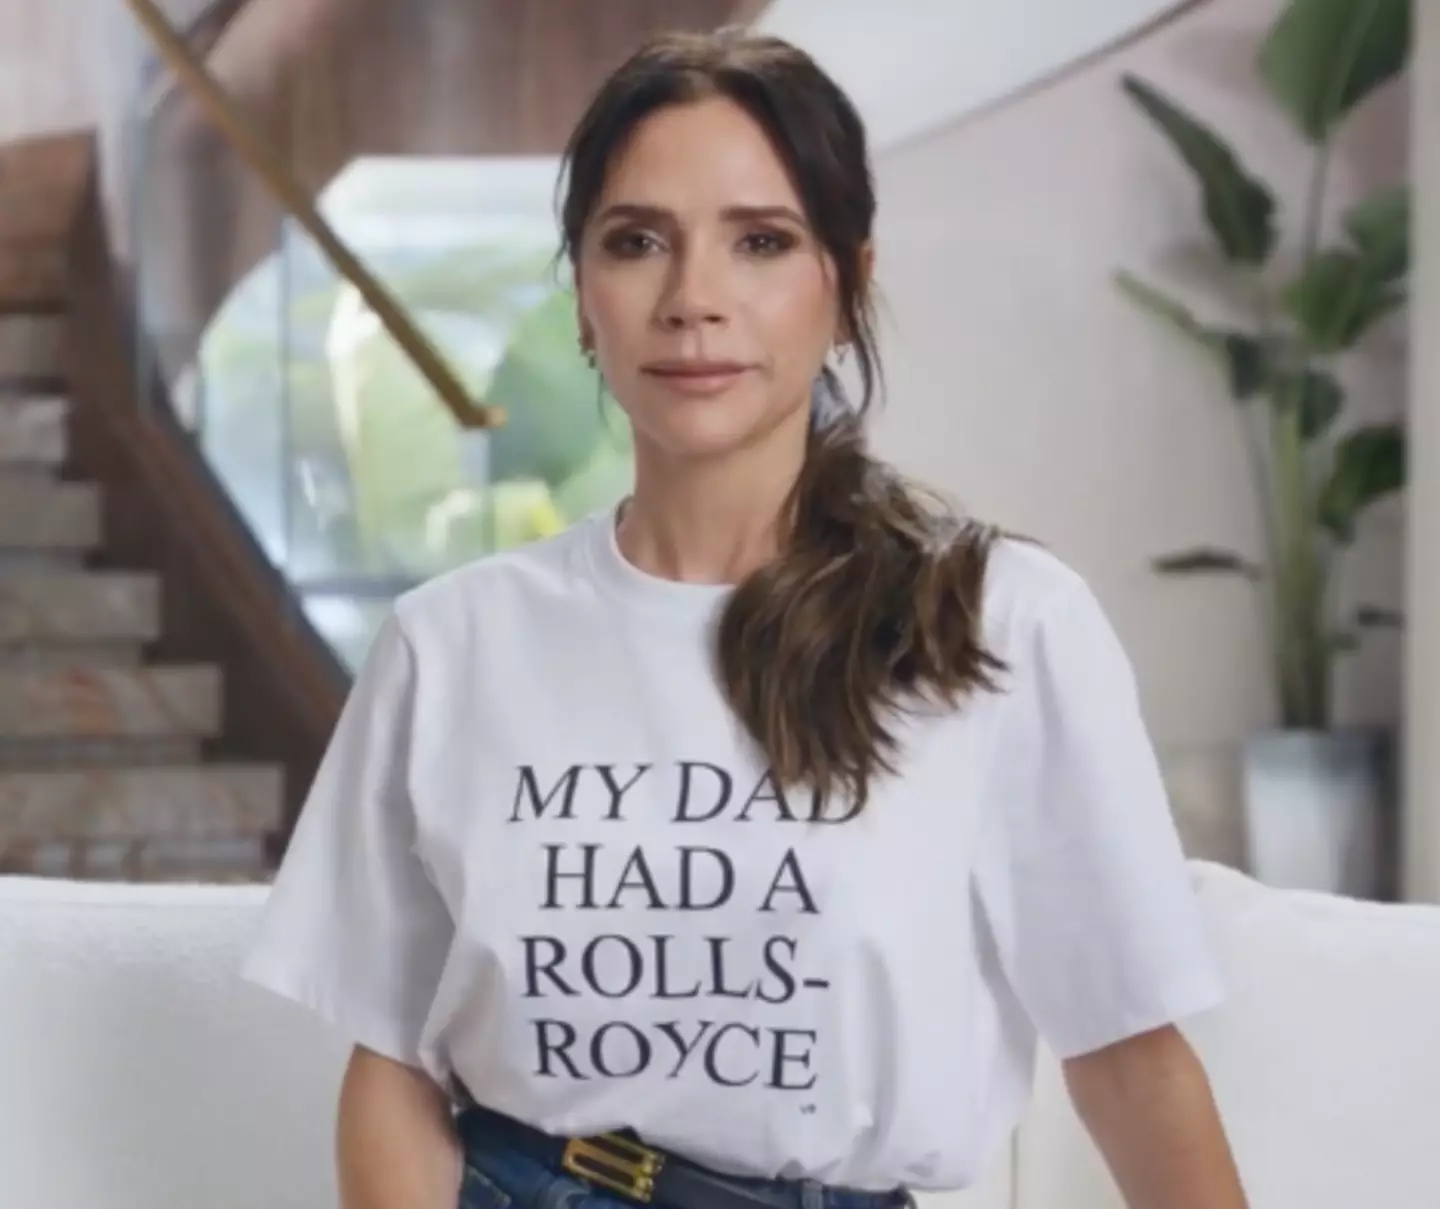 Victoria Beckham hilariously sports a 'My Dad had a Rolls-Royce' t-shirt in the Super Bowl ad teaser.